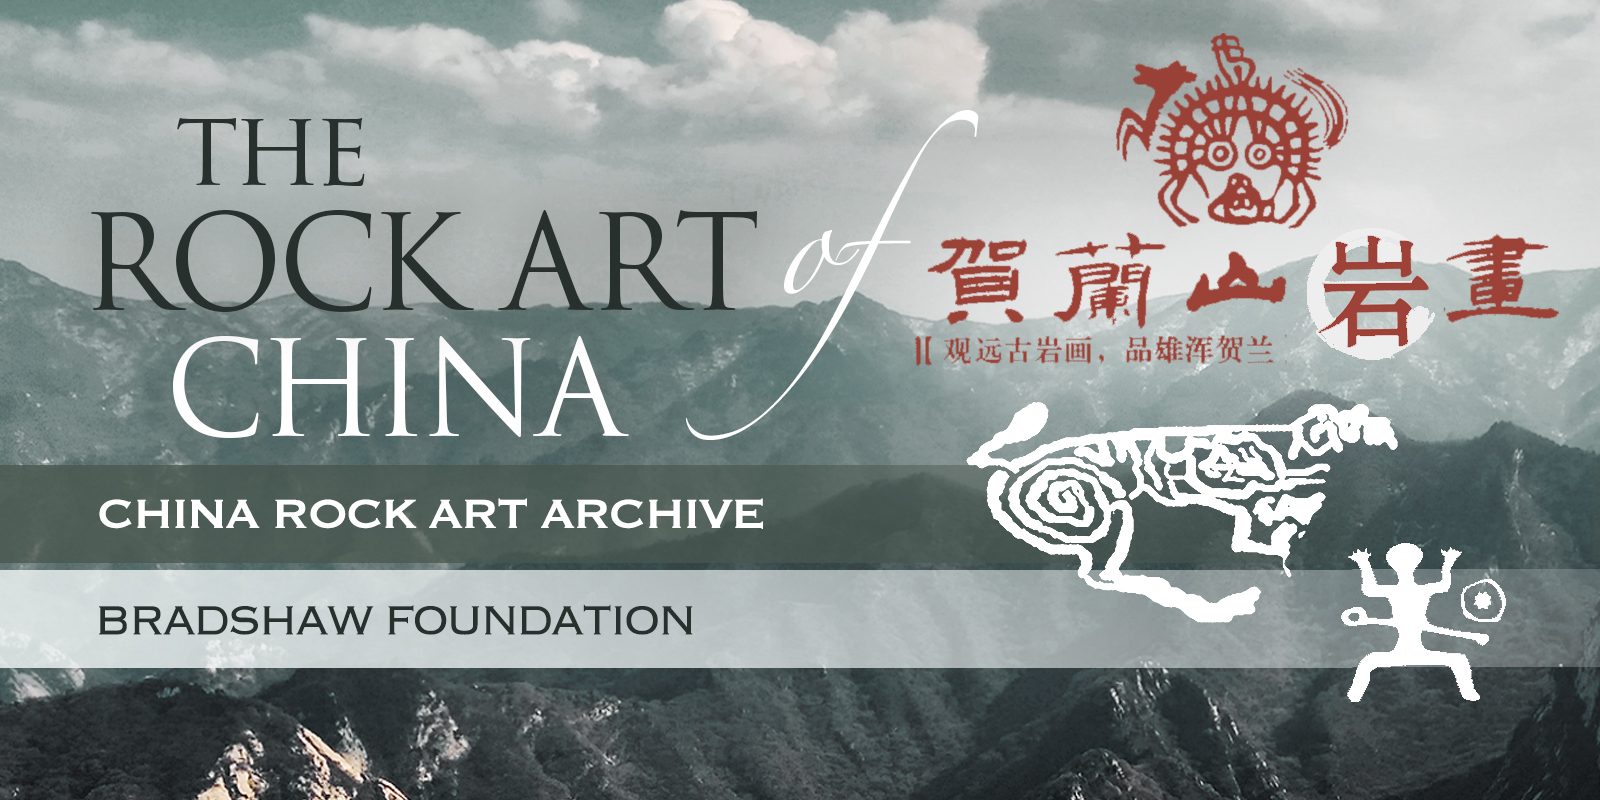 China Rock Art Archive Bradshaw Foundation Chinese Paintings Engravings Archaeology